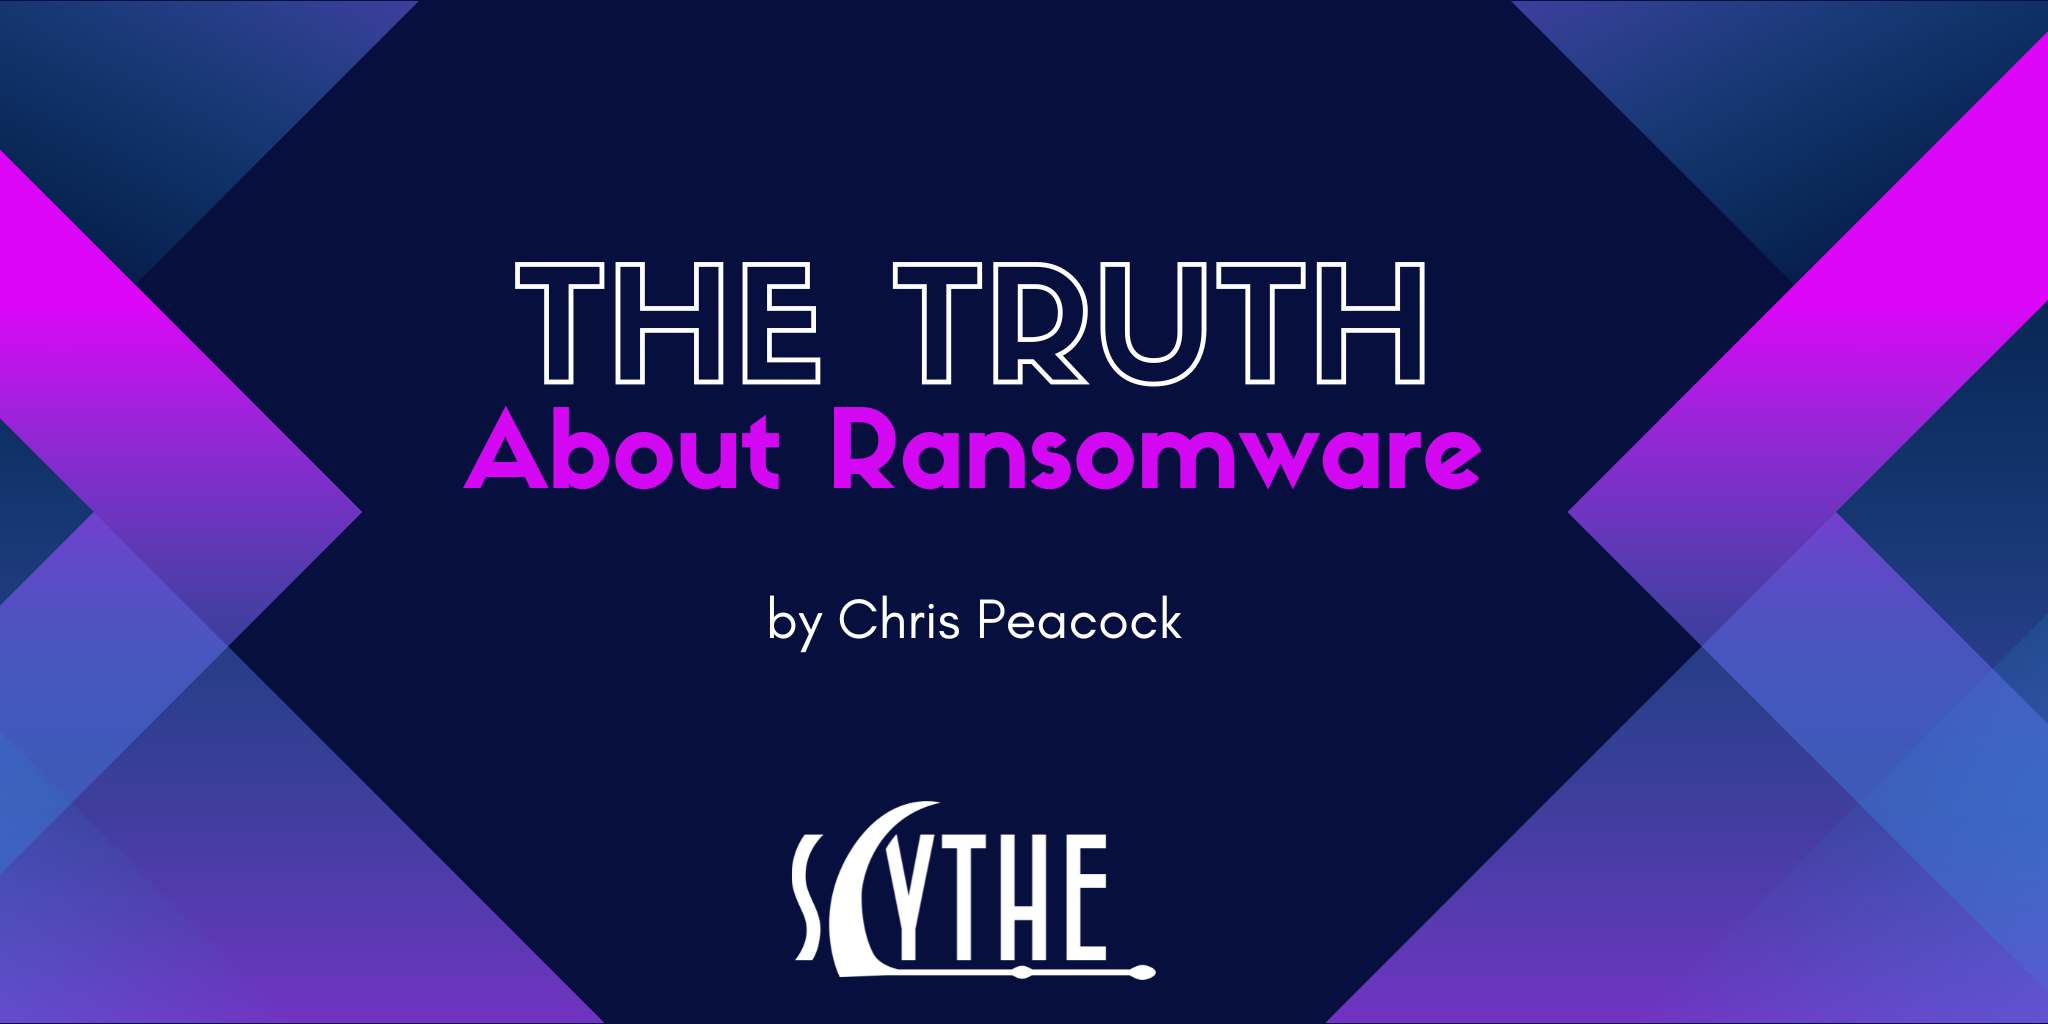 The Truth About Ransomware